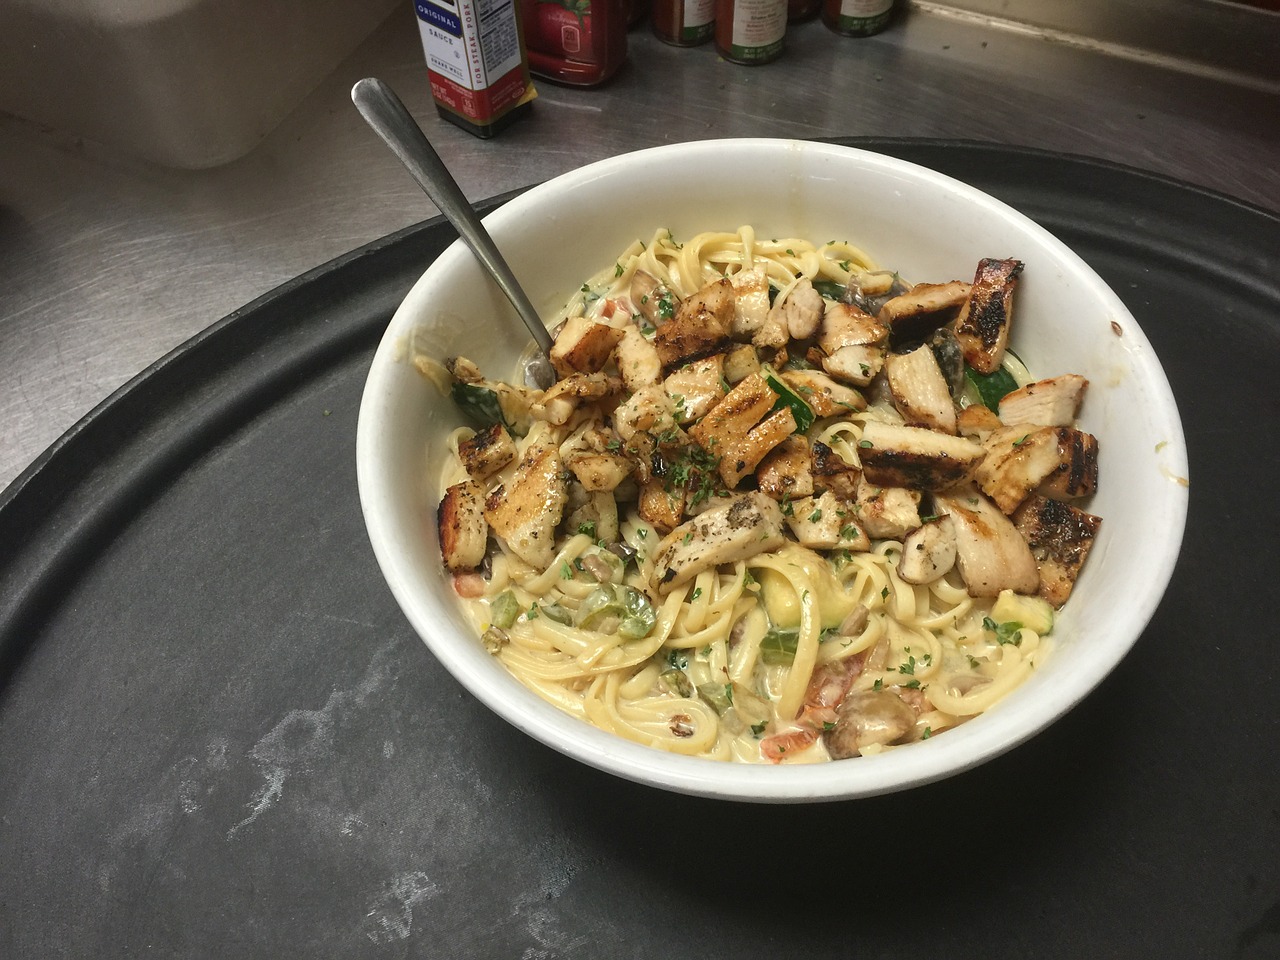 Habanero Grilled Chicken on a Bed of Pasta